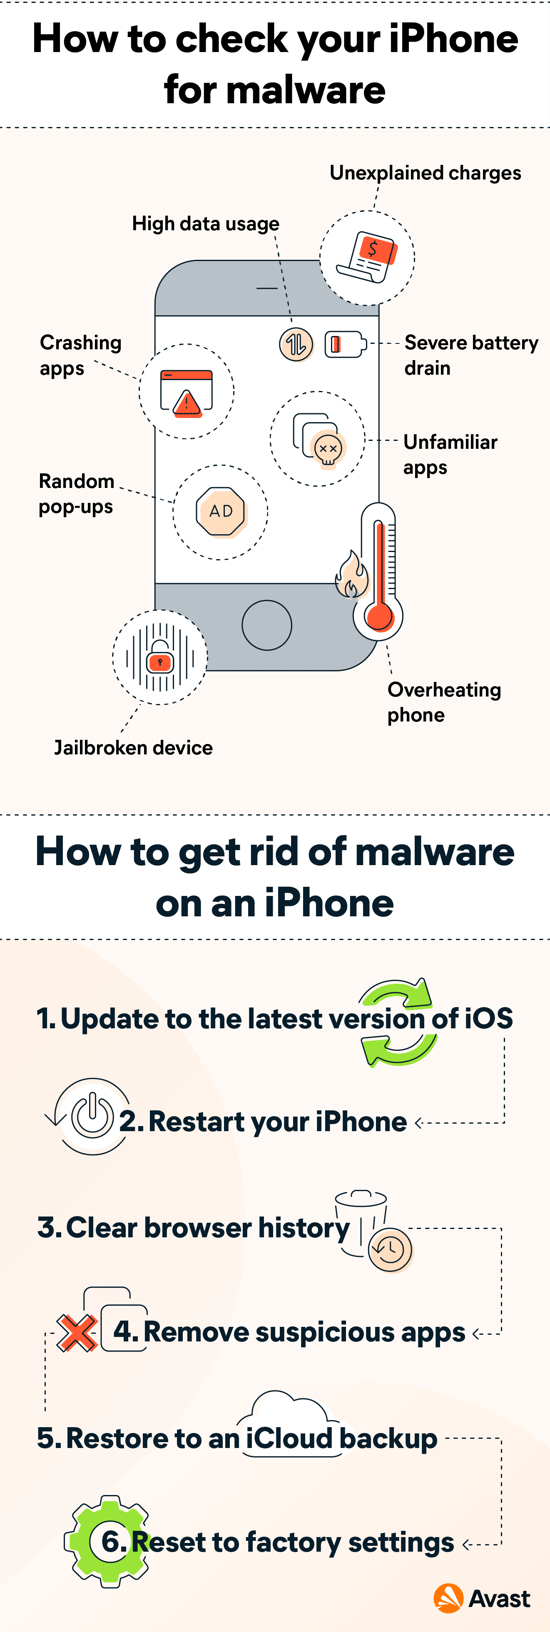 How to check for viruses and remove malware on your iPhone.